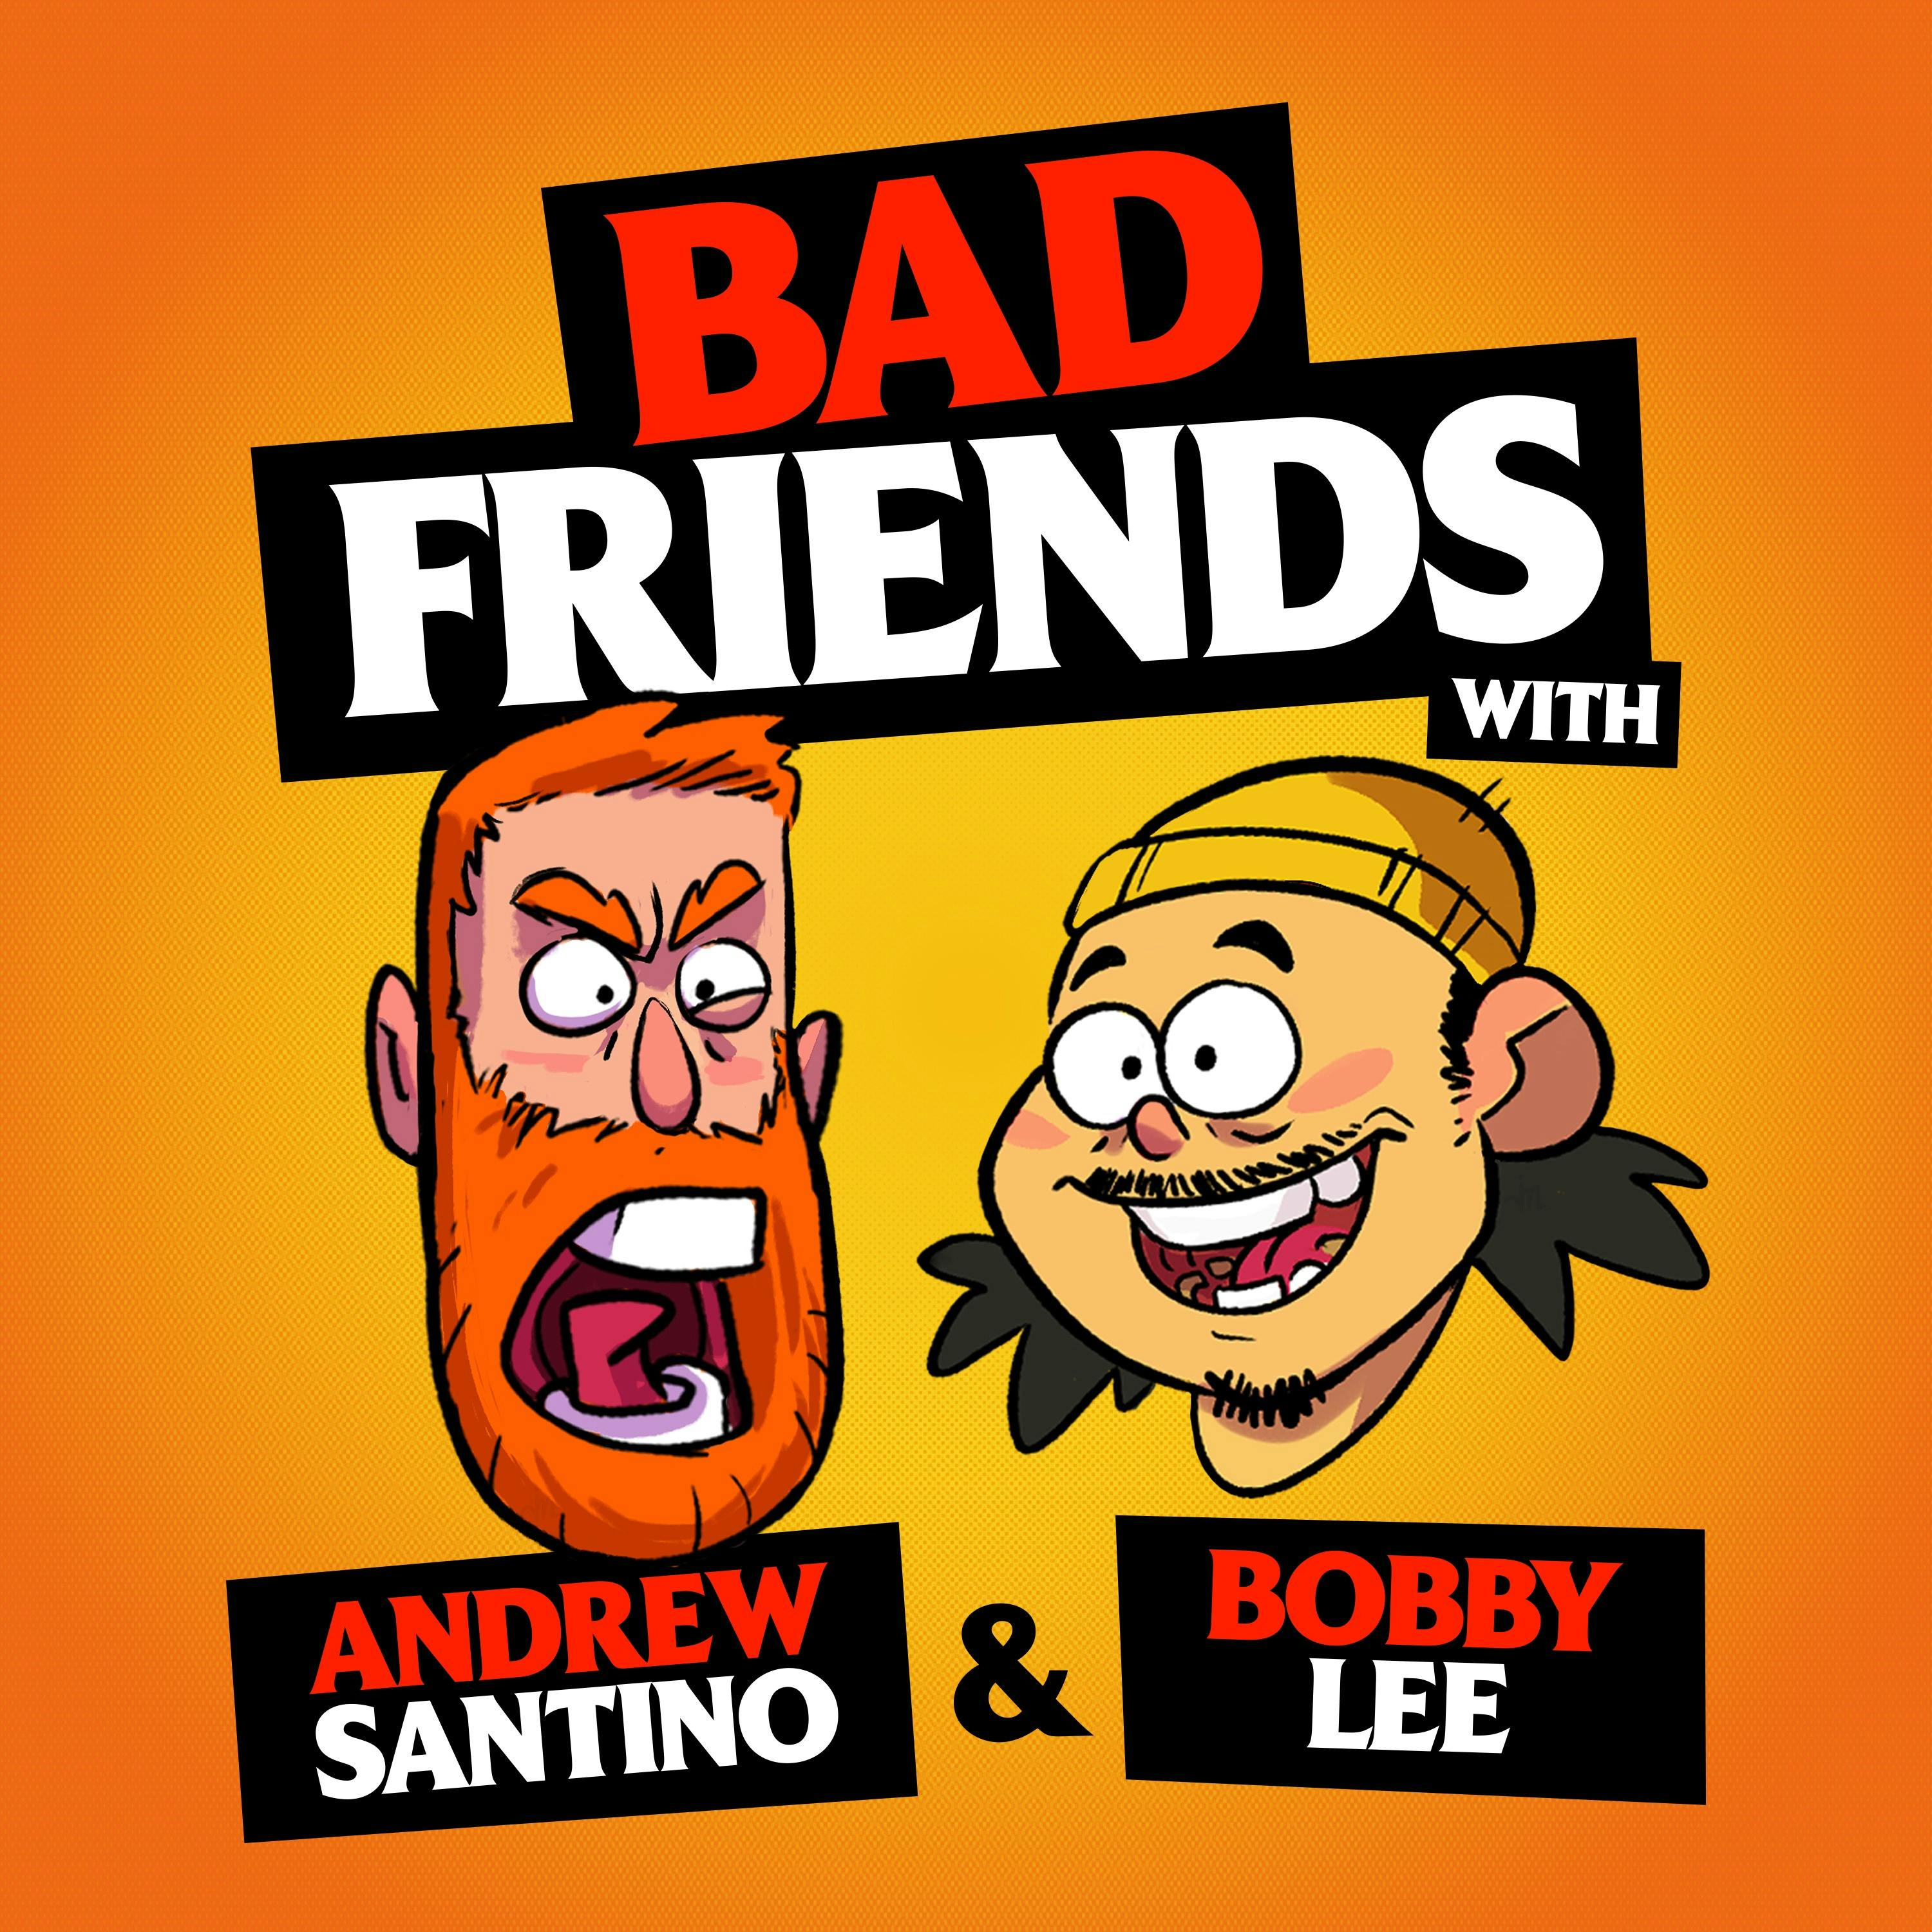 Andrew Has Heat! by Andrew Santino and Bobby Lee